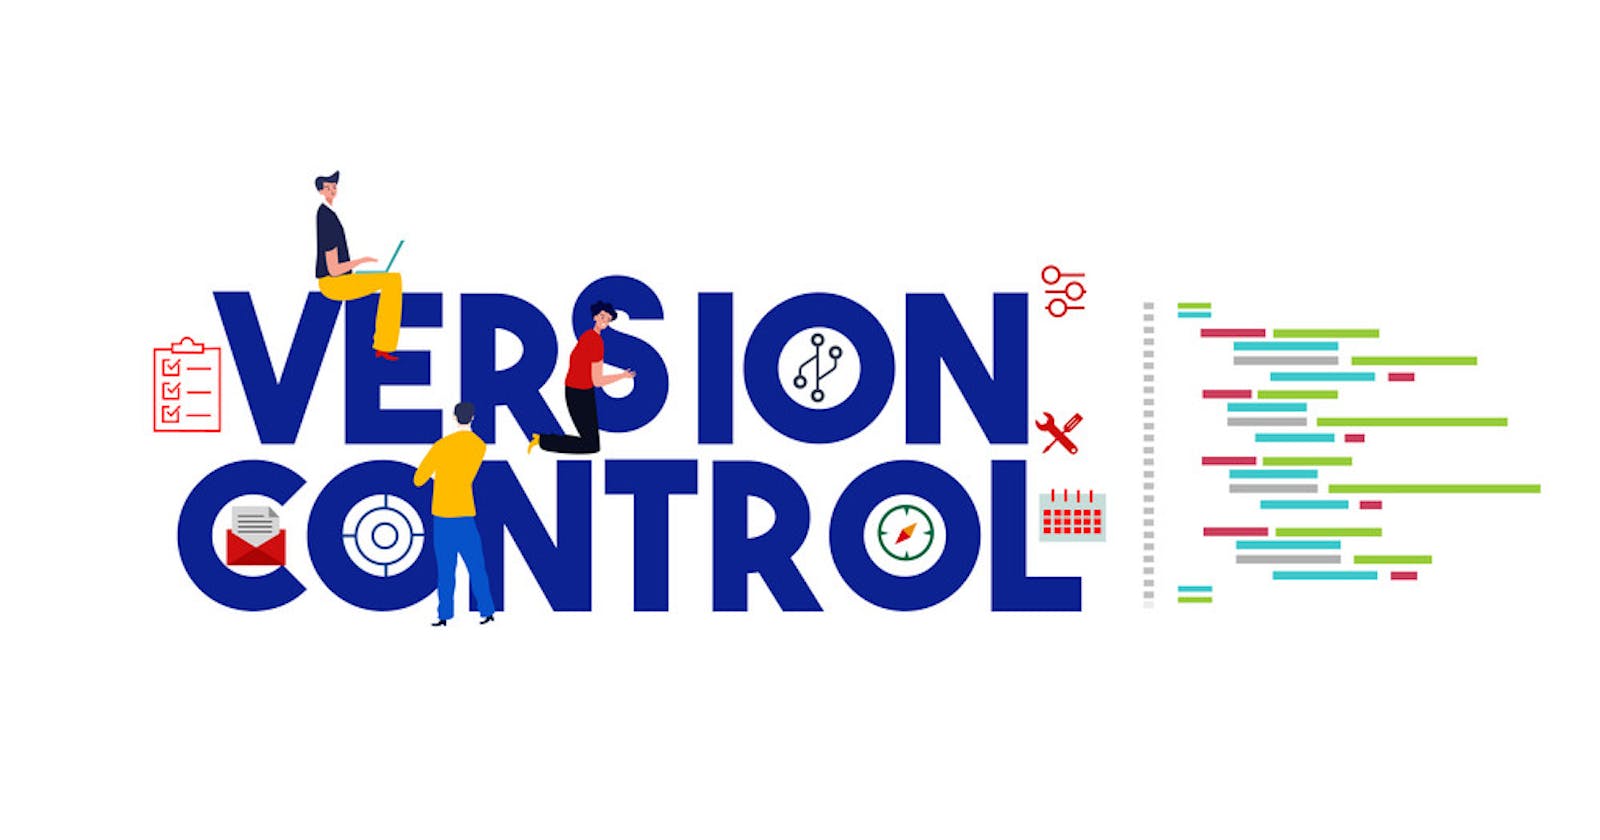 Introduction To Version Control System